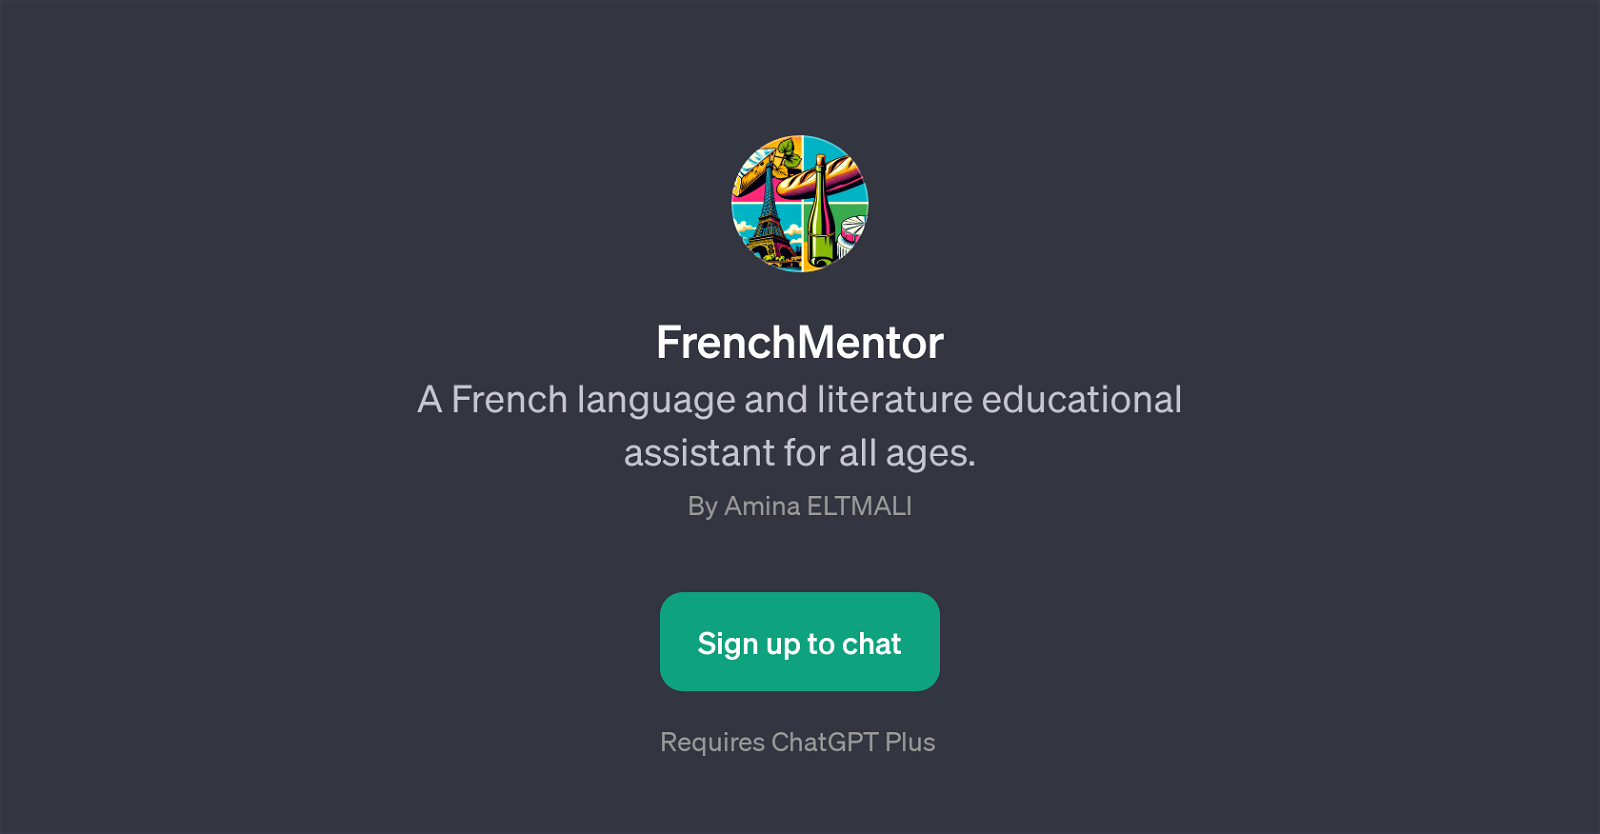 FrenchMentor website